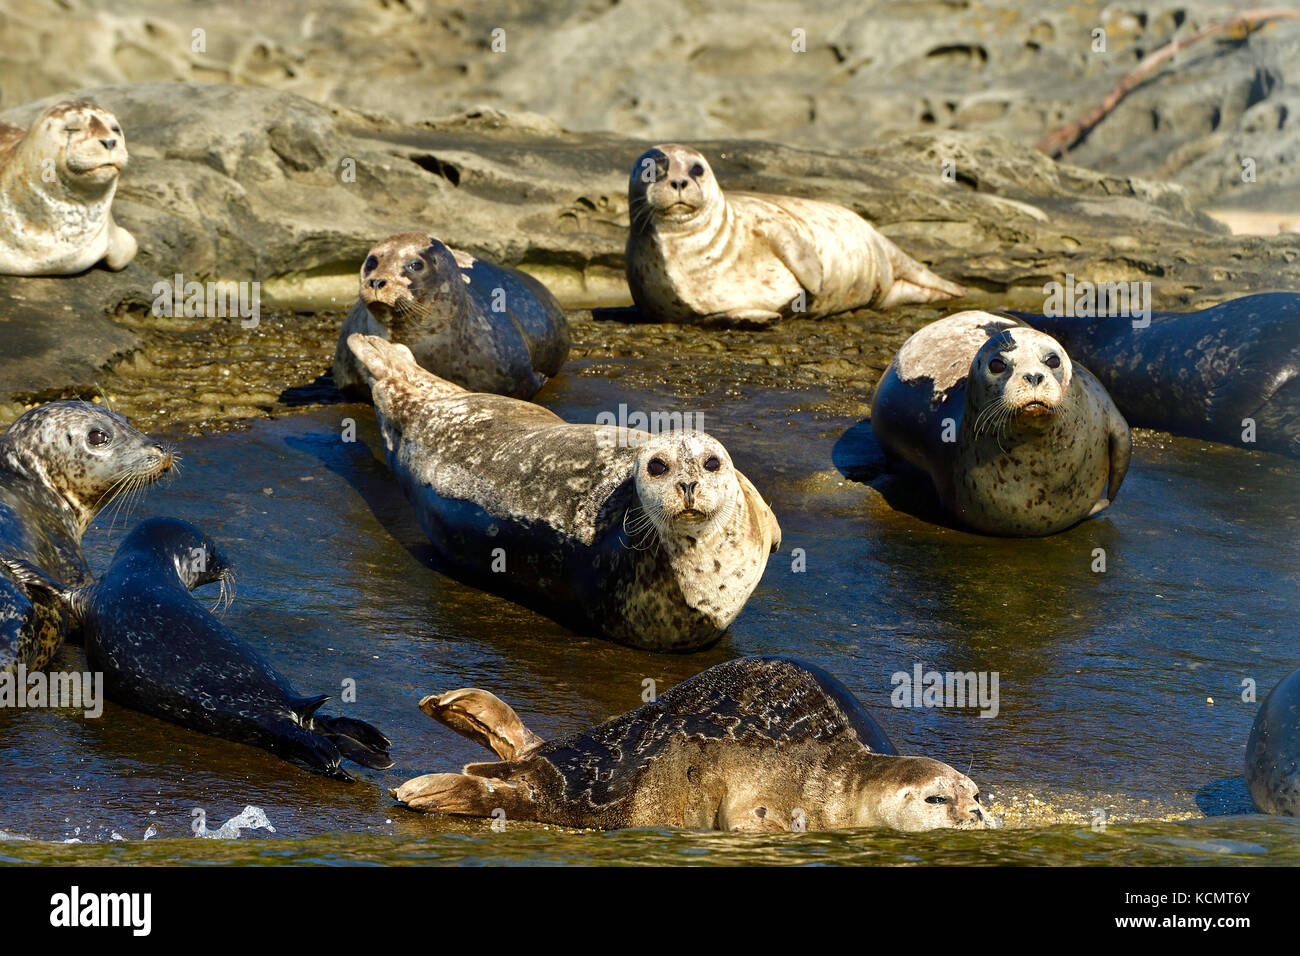 A herd of harbor seals (Phoca vitulina);  lay basking in the warm sunlight on a secluded island beach near Vancouver Island British Columbia Canada Stock Photo